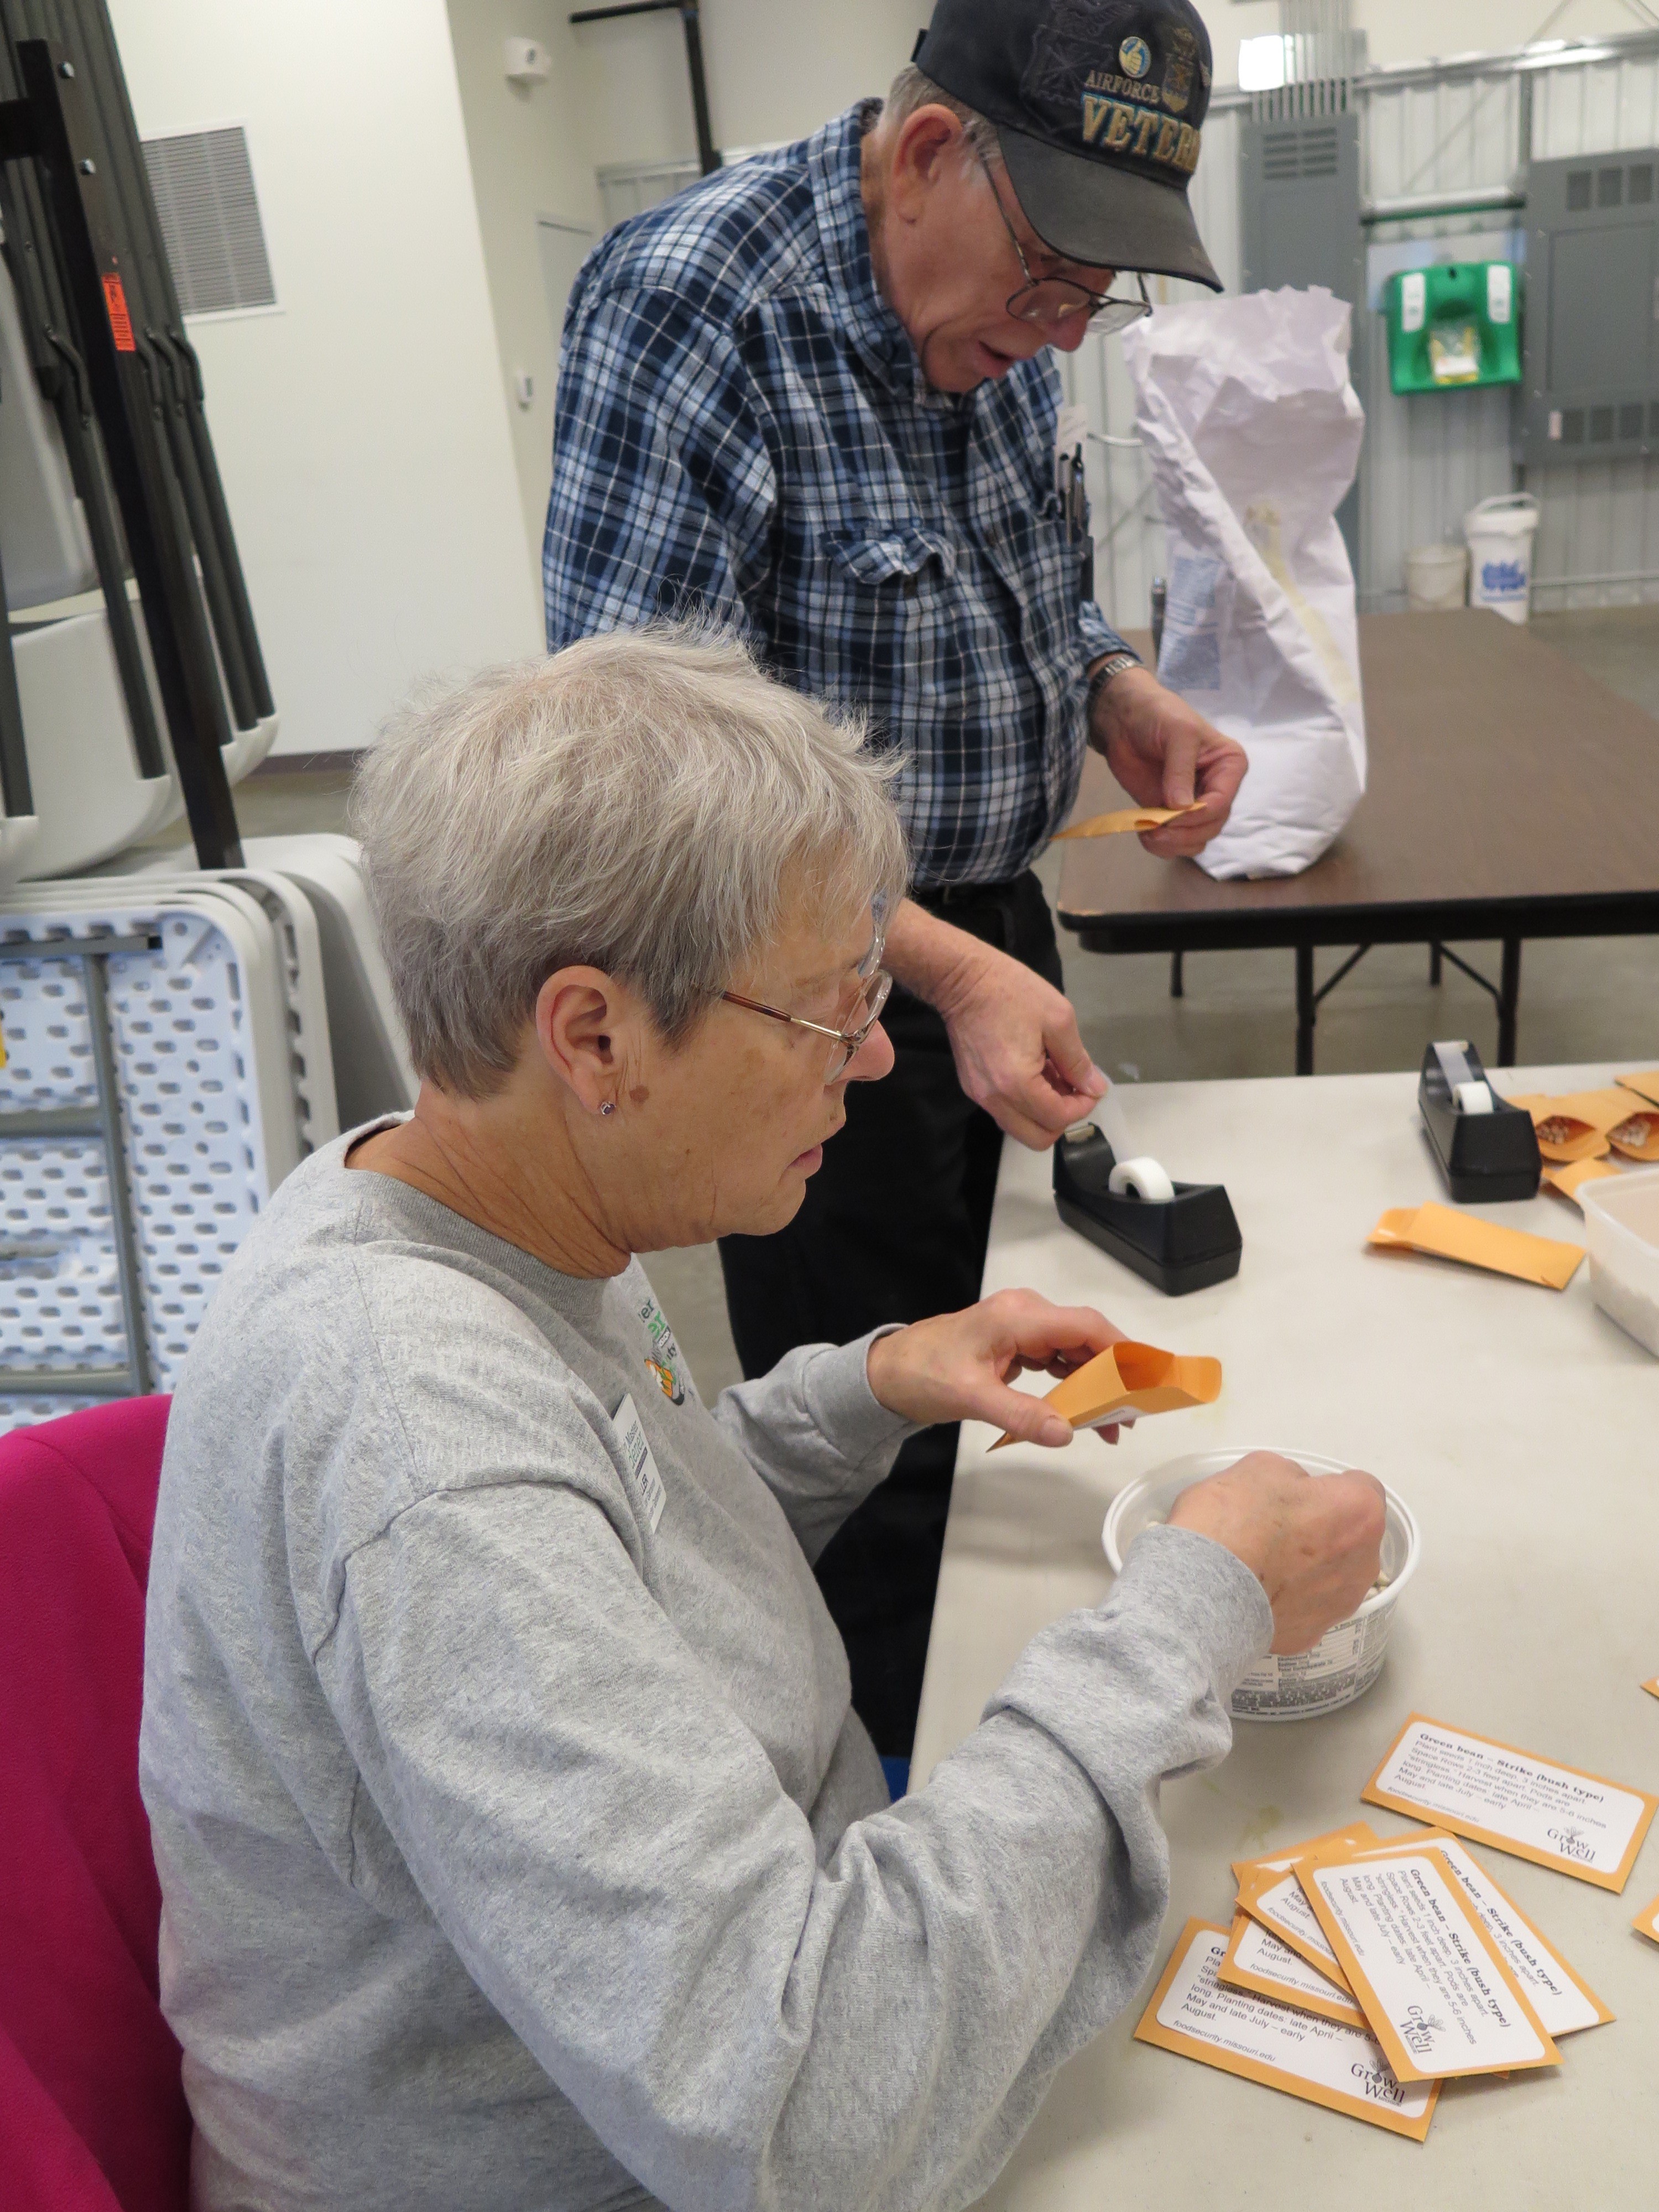 Pat Miller and Dayton Shepherd are among the many Master Gardener and Grow Well Missouri partners who volunteer at the Mexico Help Center. MU Extension Master Gardeners and community volunteers sort and package bulk seeds to give to food pantry clients wh